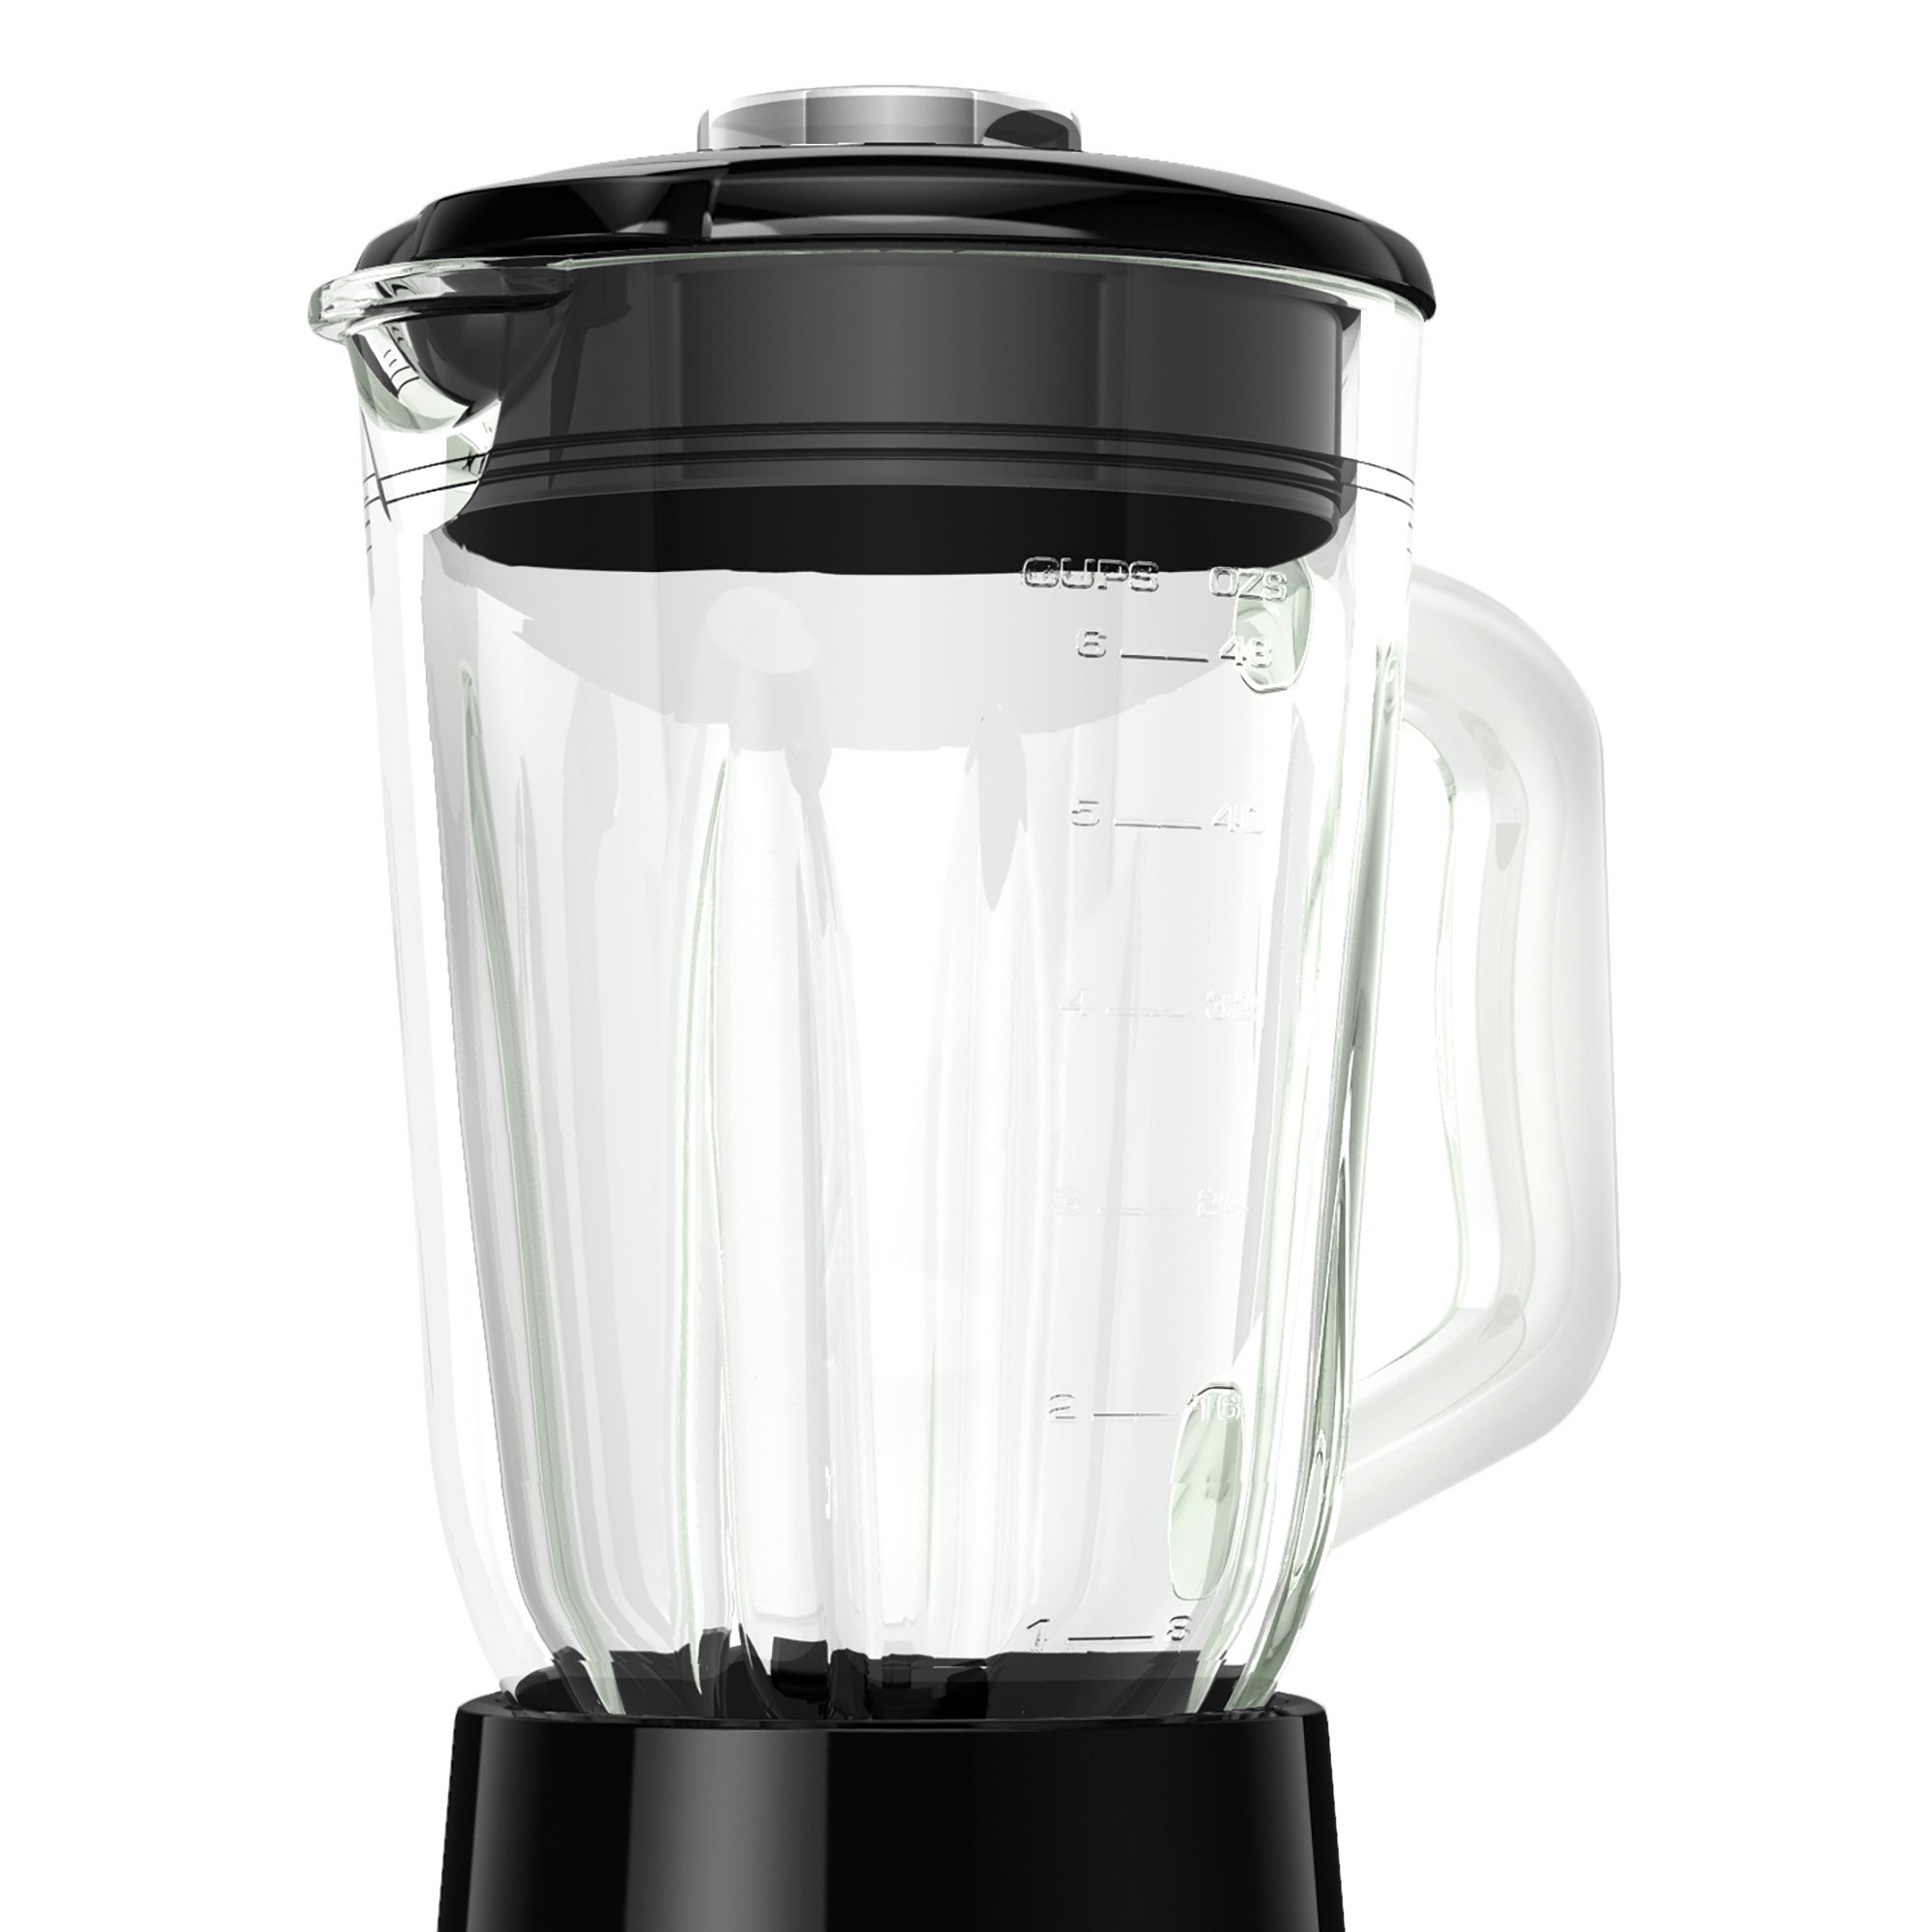 BLACK+DECKER FusionBlade Blender with 6-Cup Glass Jar, 12-Speed Settings, Silver, BL1111SG